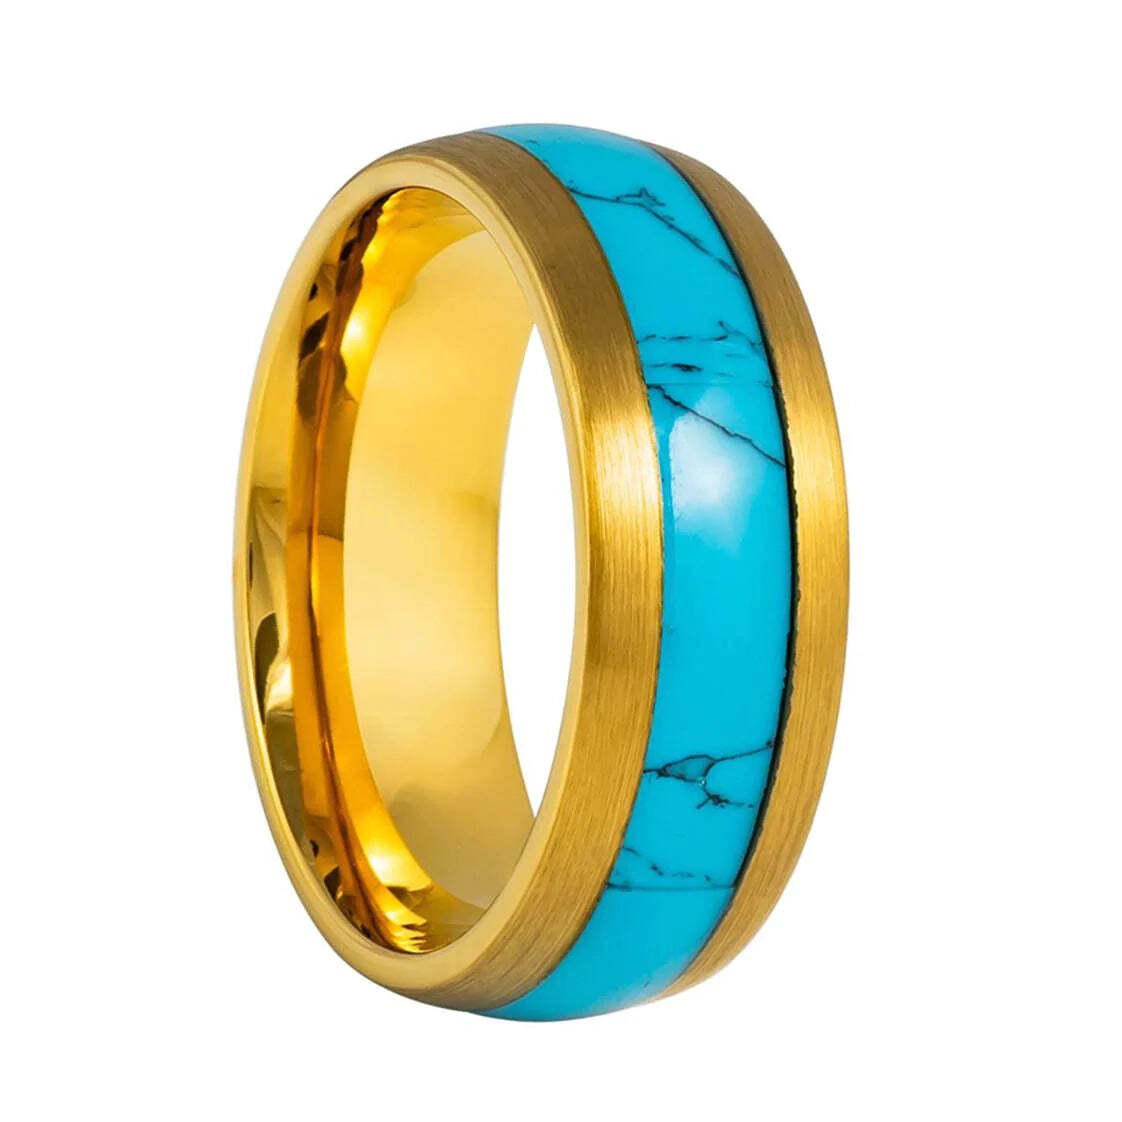 Turquoise Inlaid Domed Gold Tungsten Men's Wedding Band